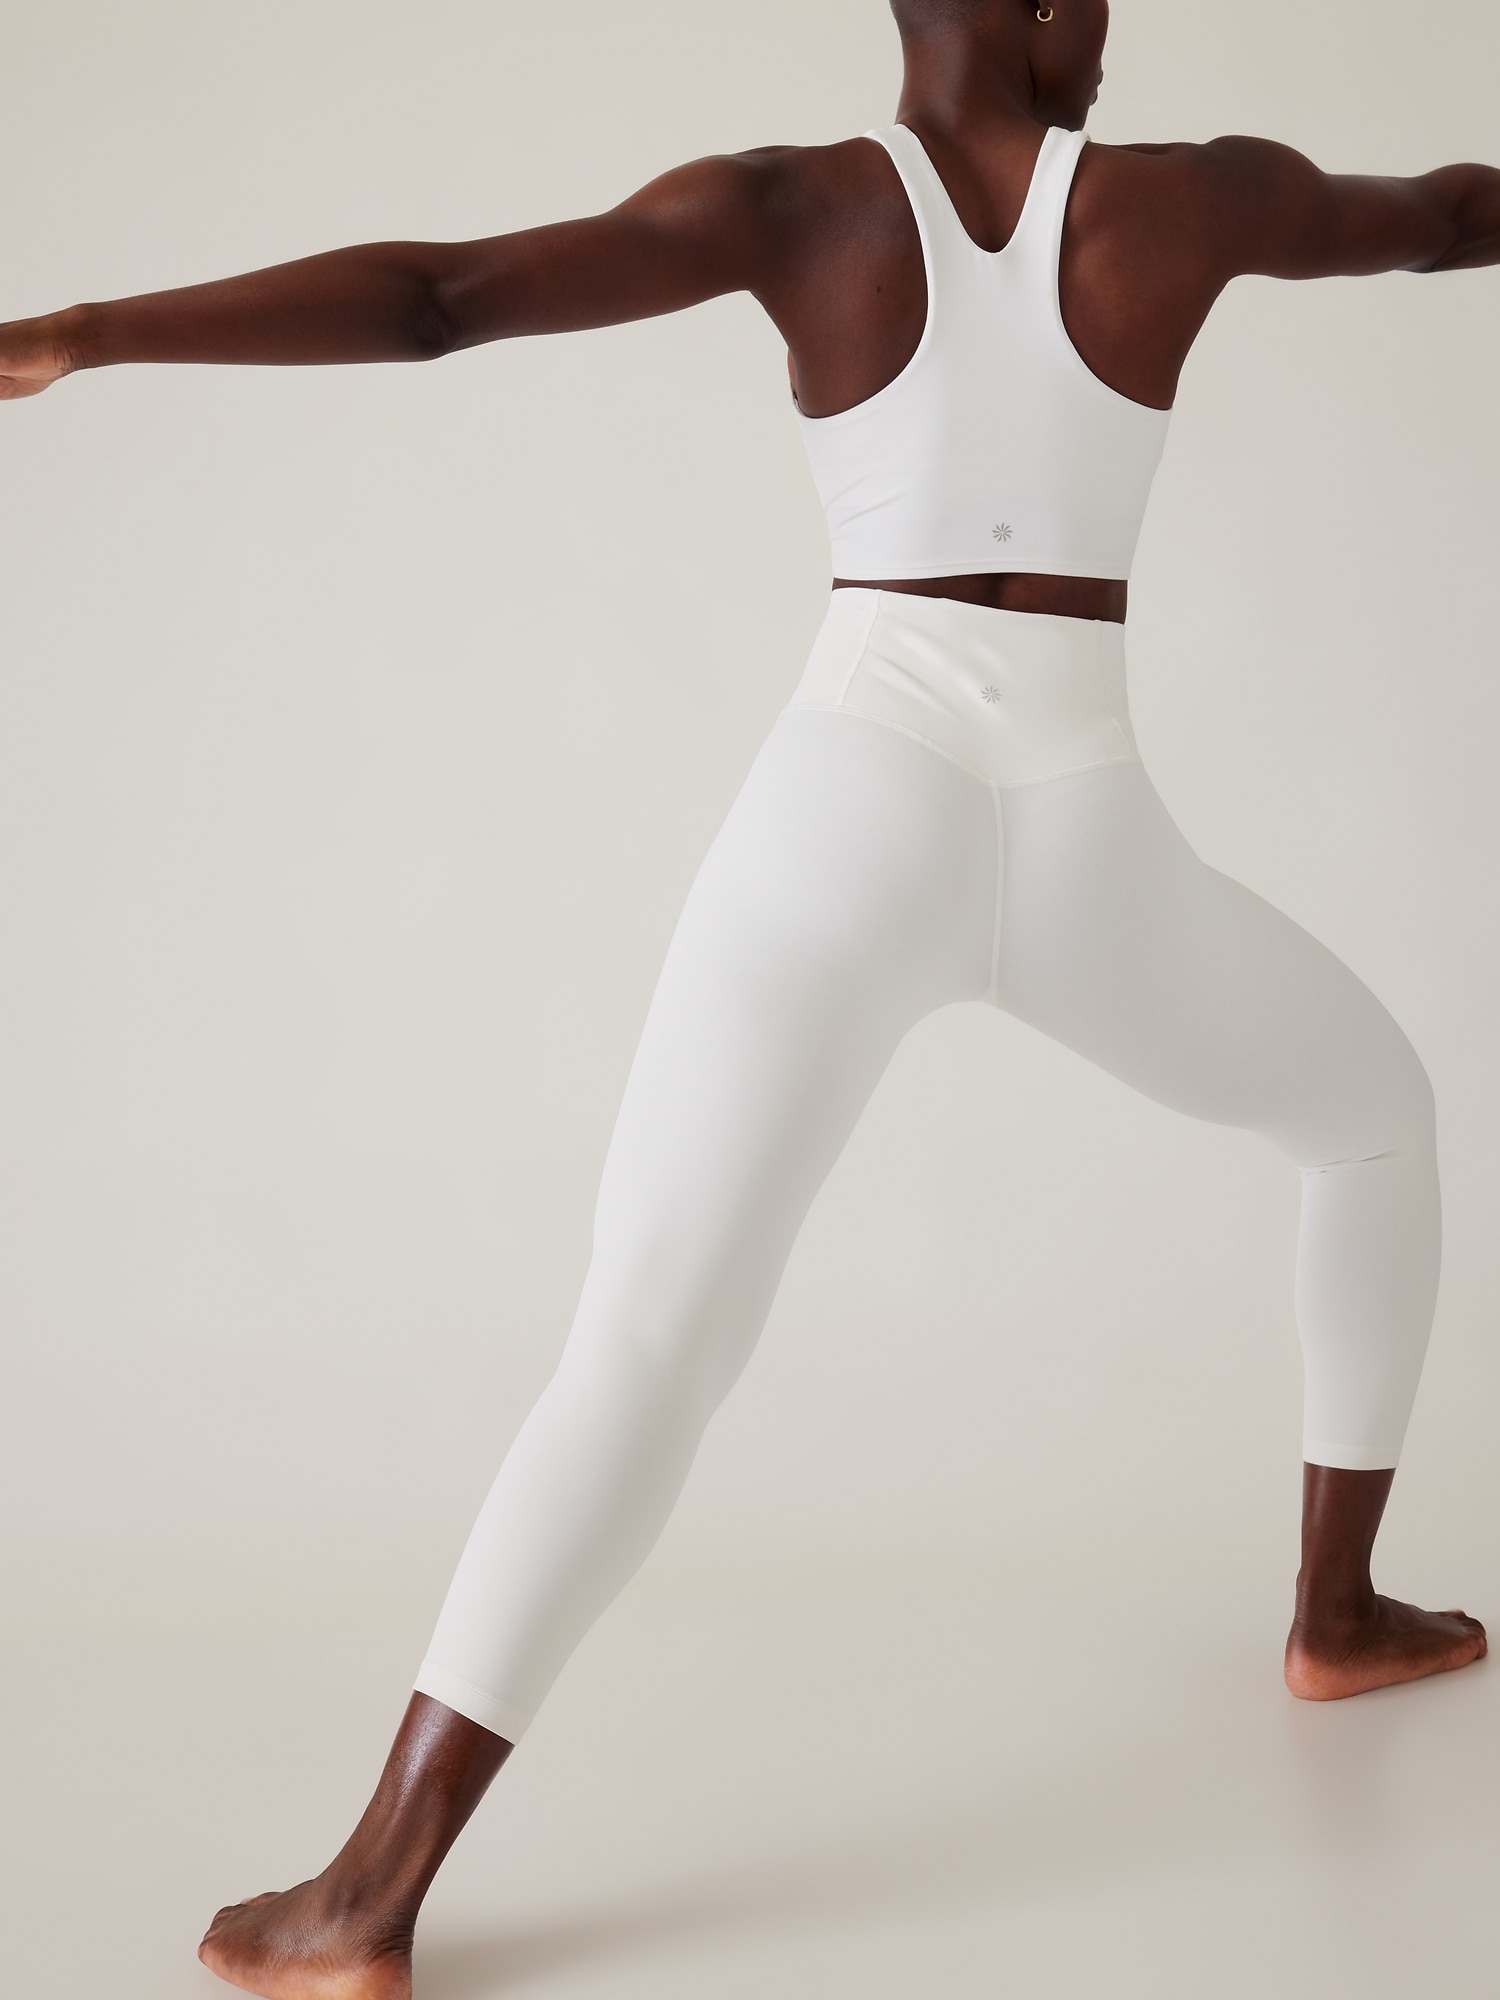 Best Black Running Leggings: Athleta Elation Train 7/8 Tight, If You're a  Runner, These Are the 10 Leggings You Need in Your Arsenal